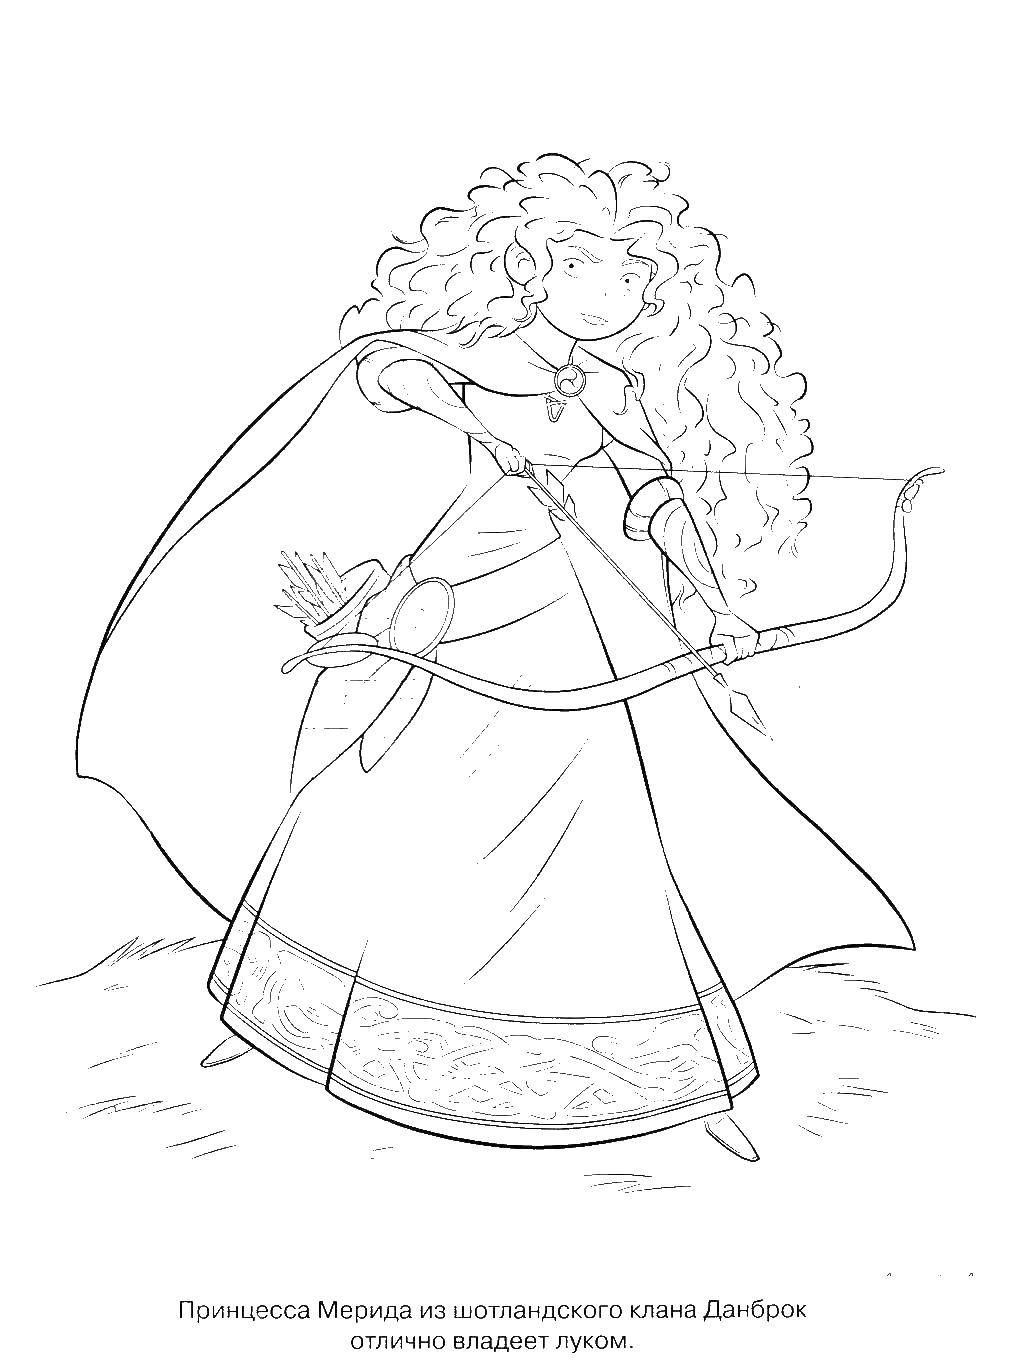 Coloring Princess Merida with bow. Category brave heart. Tags:  Merida, brave.